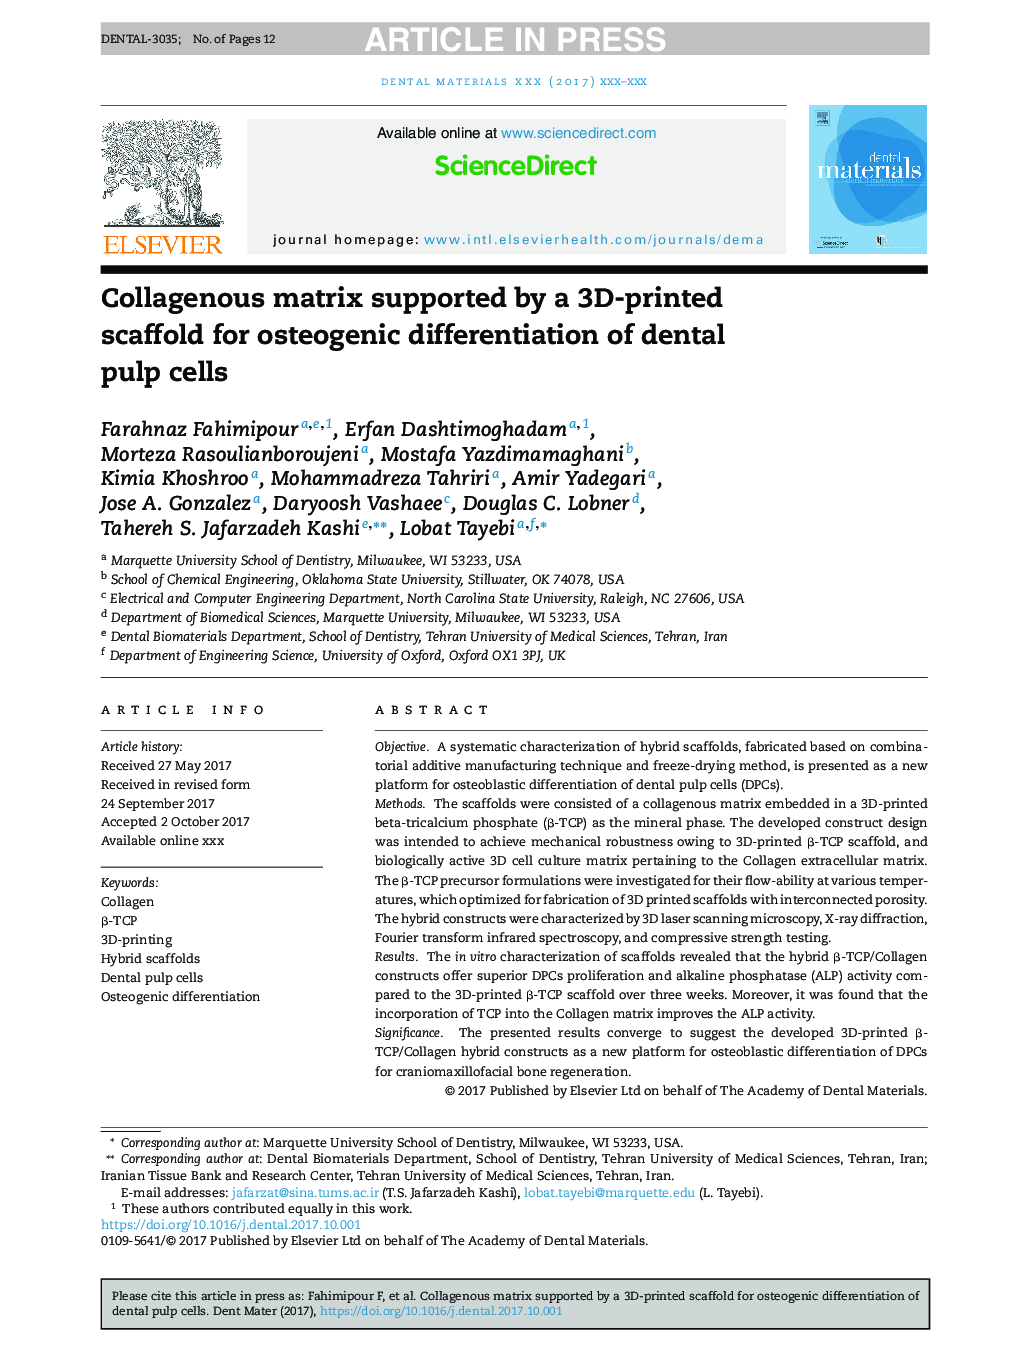 Collagenous matrix supported by a 3D-printed scaffold for osteogenic differentiation of dental pulp cells